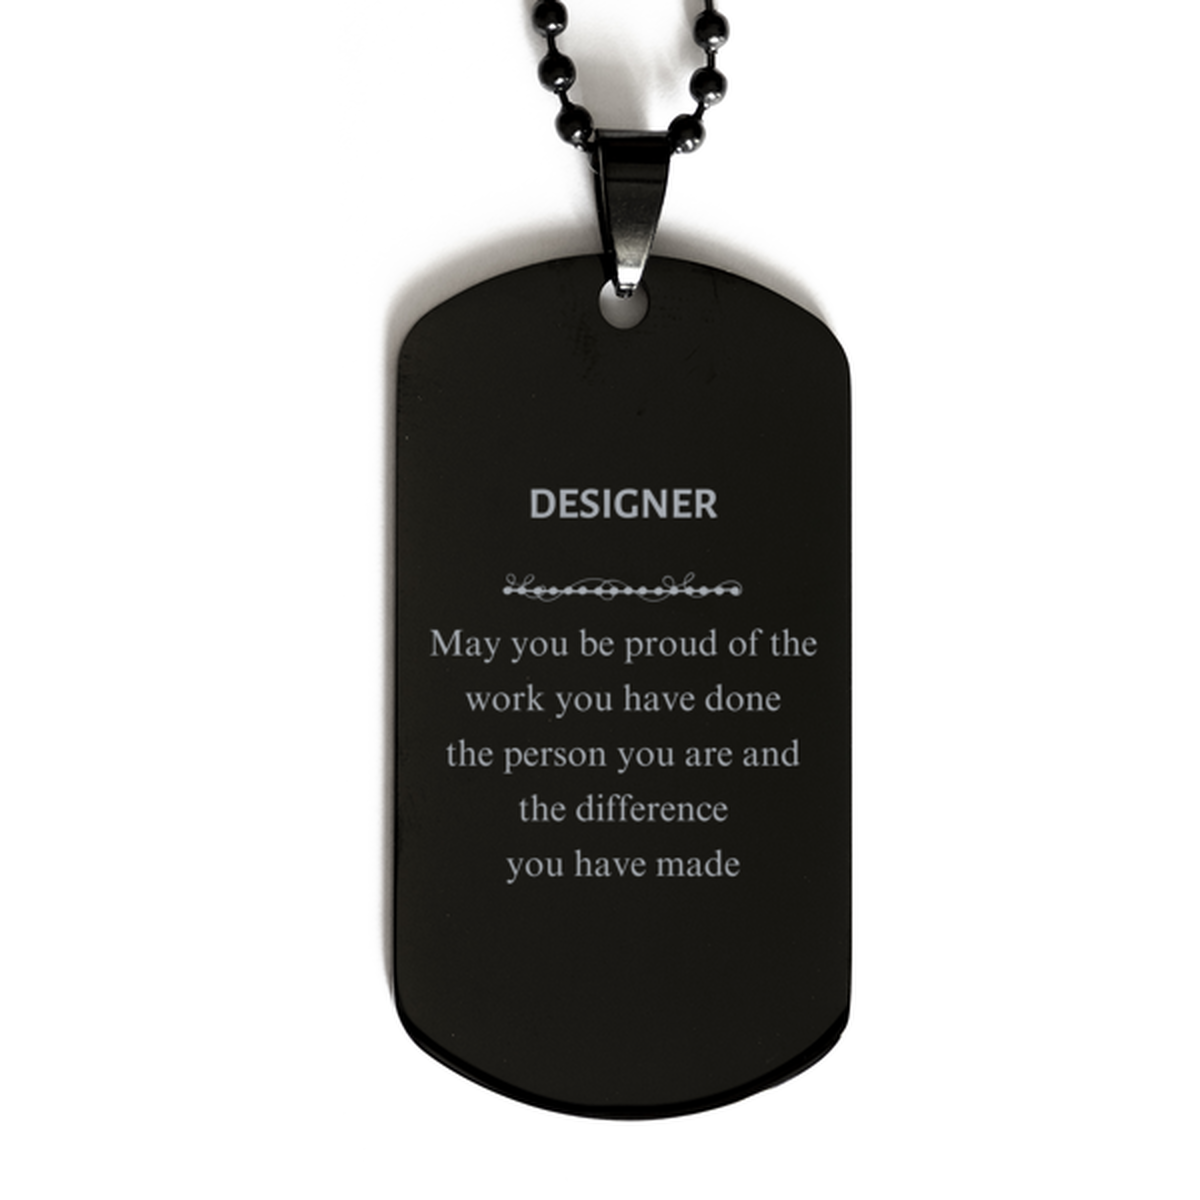 Designer May you be proud of the work you have done, Retirement Designer Black Dog Tag for Colleague Appreciation Gifts Amazing for Designer